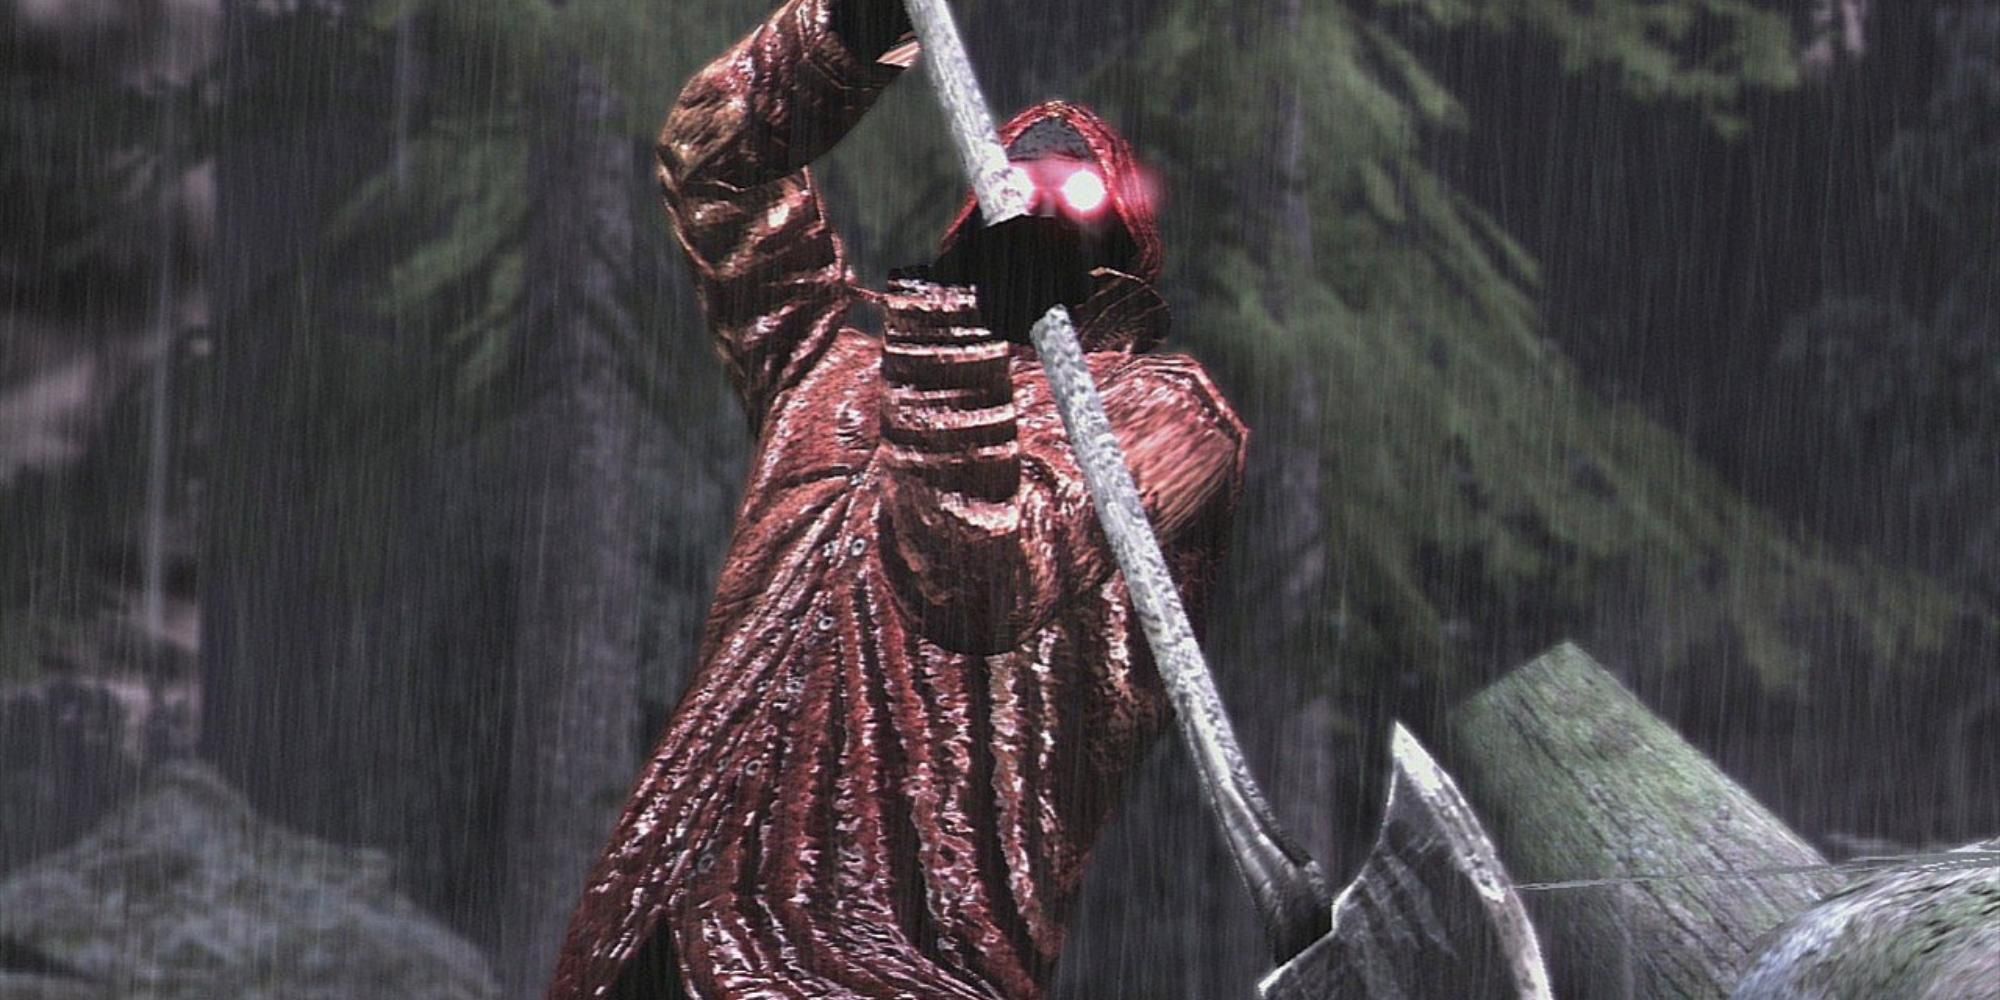 The Raincoat Killer attacking in Deadly Premonition